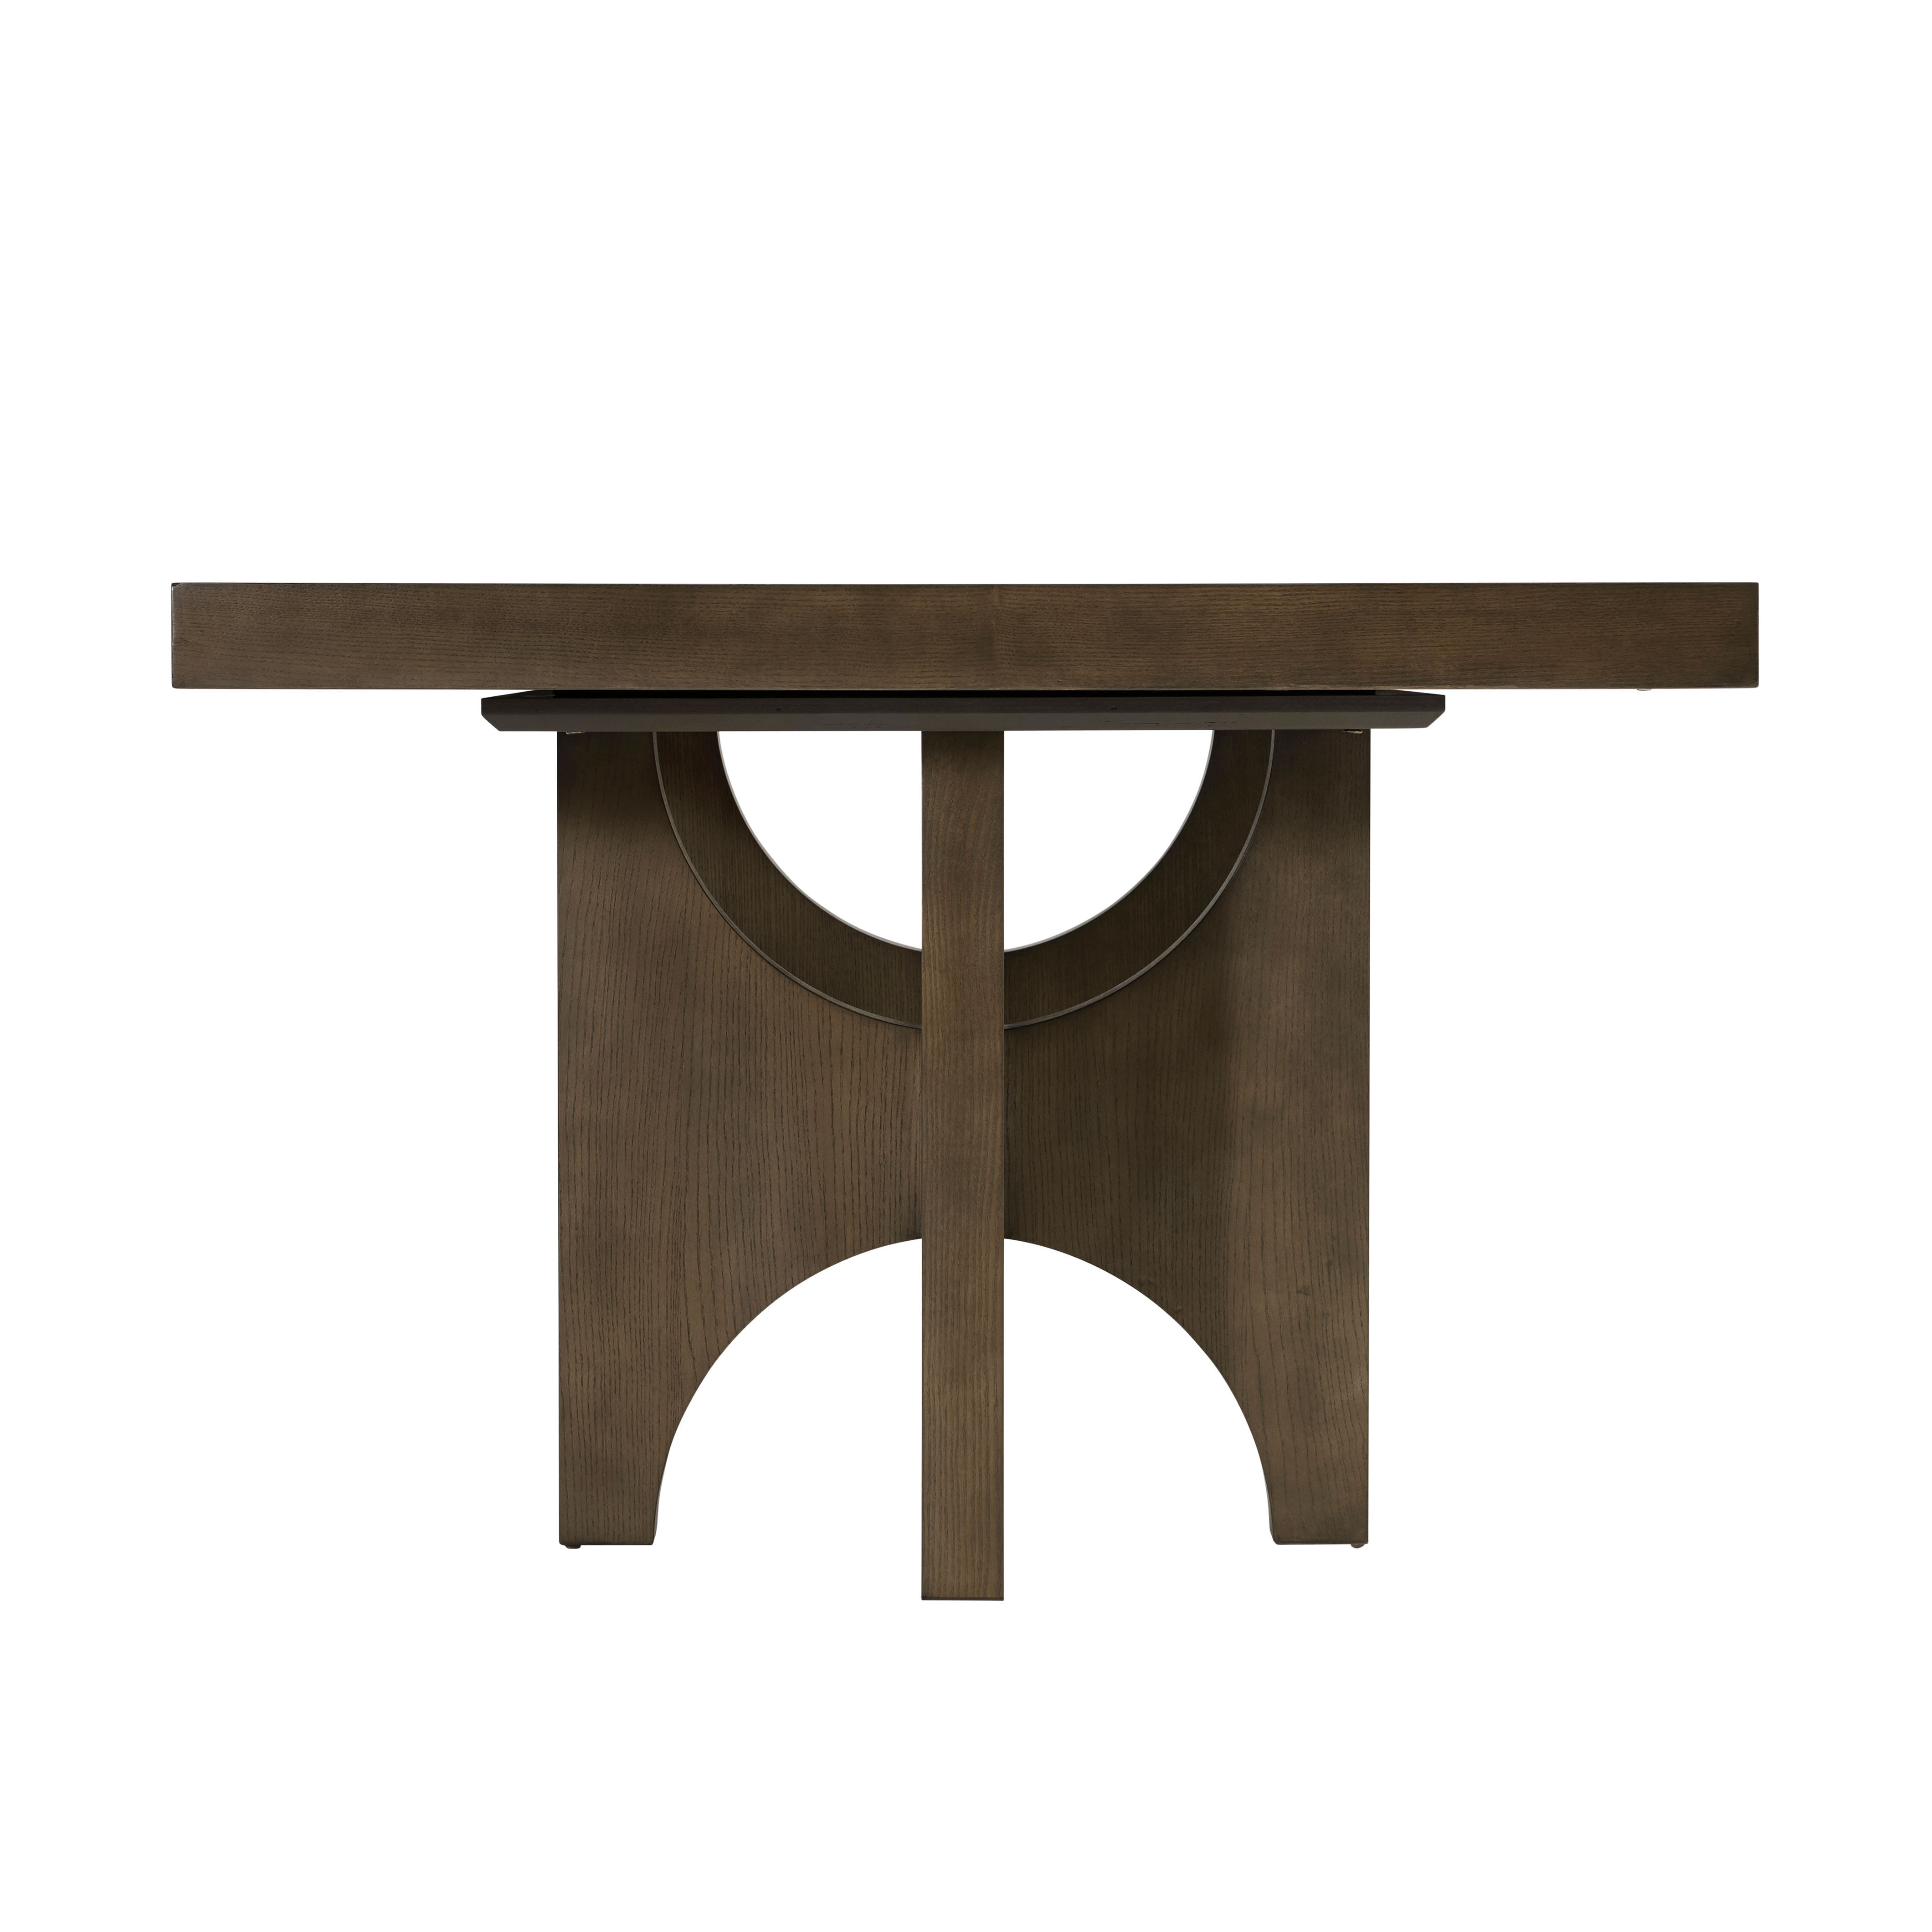 CATALINA EXTENDING DINING TABLE